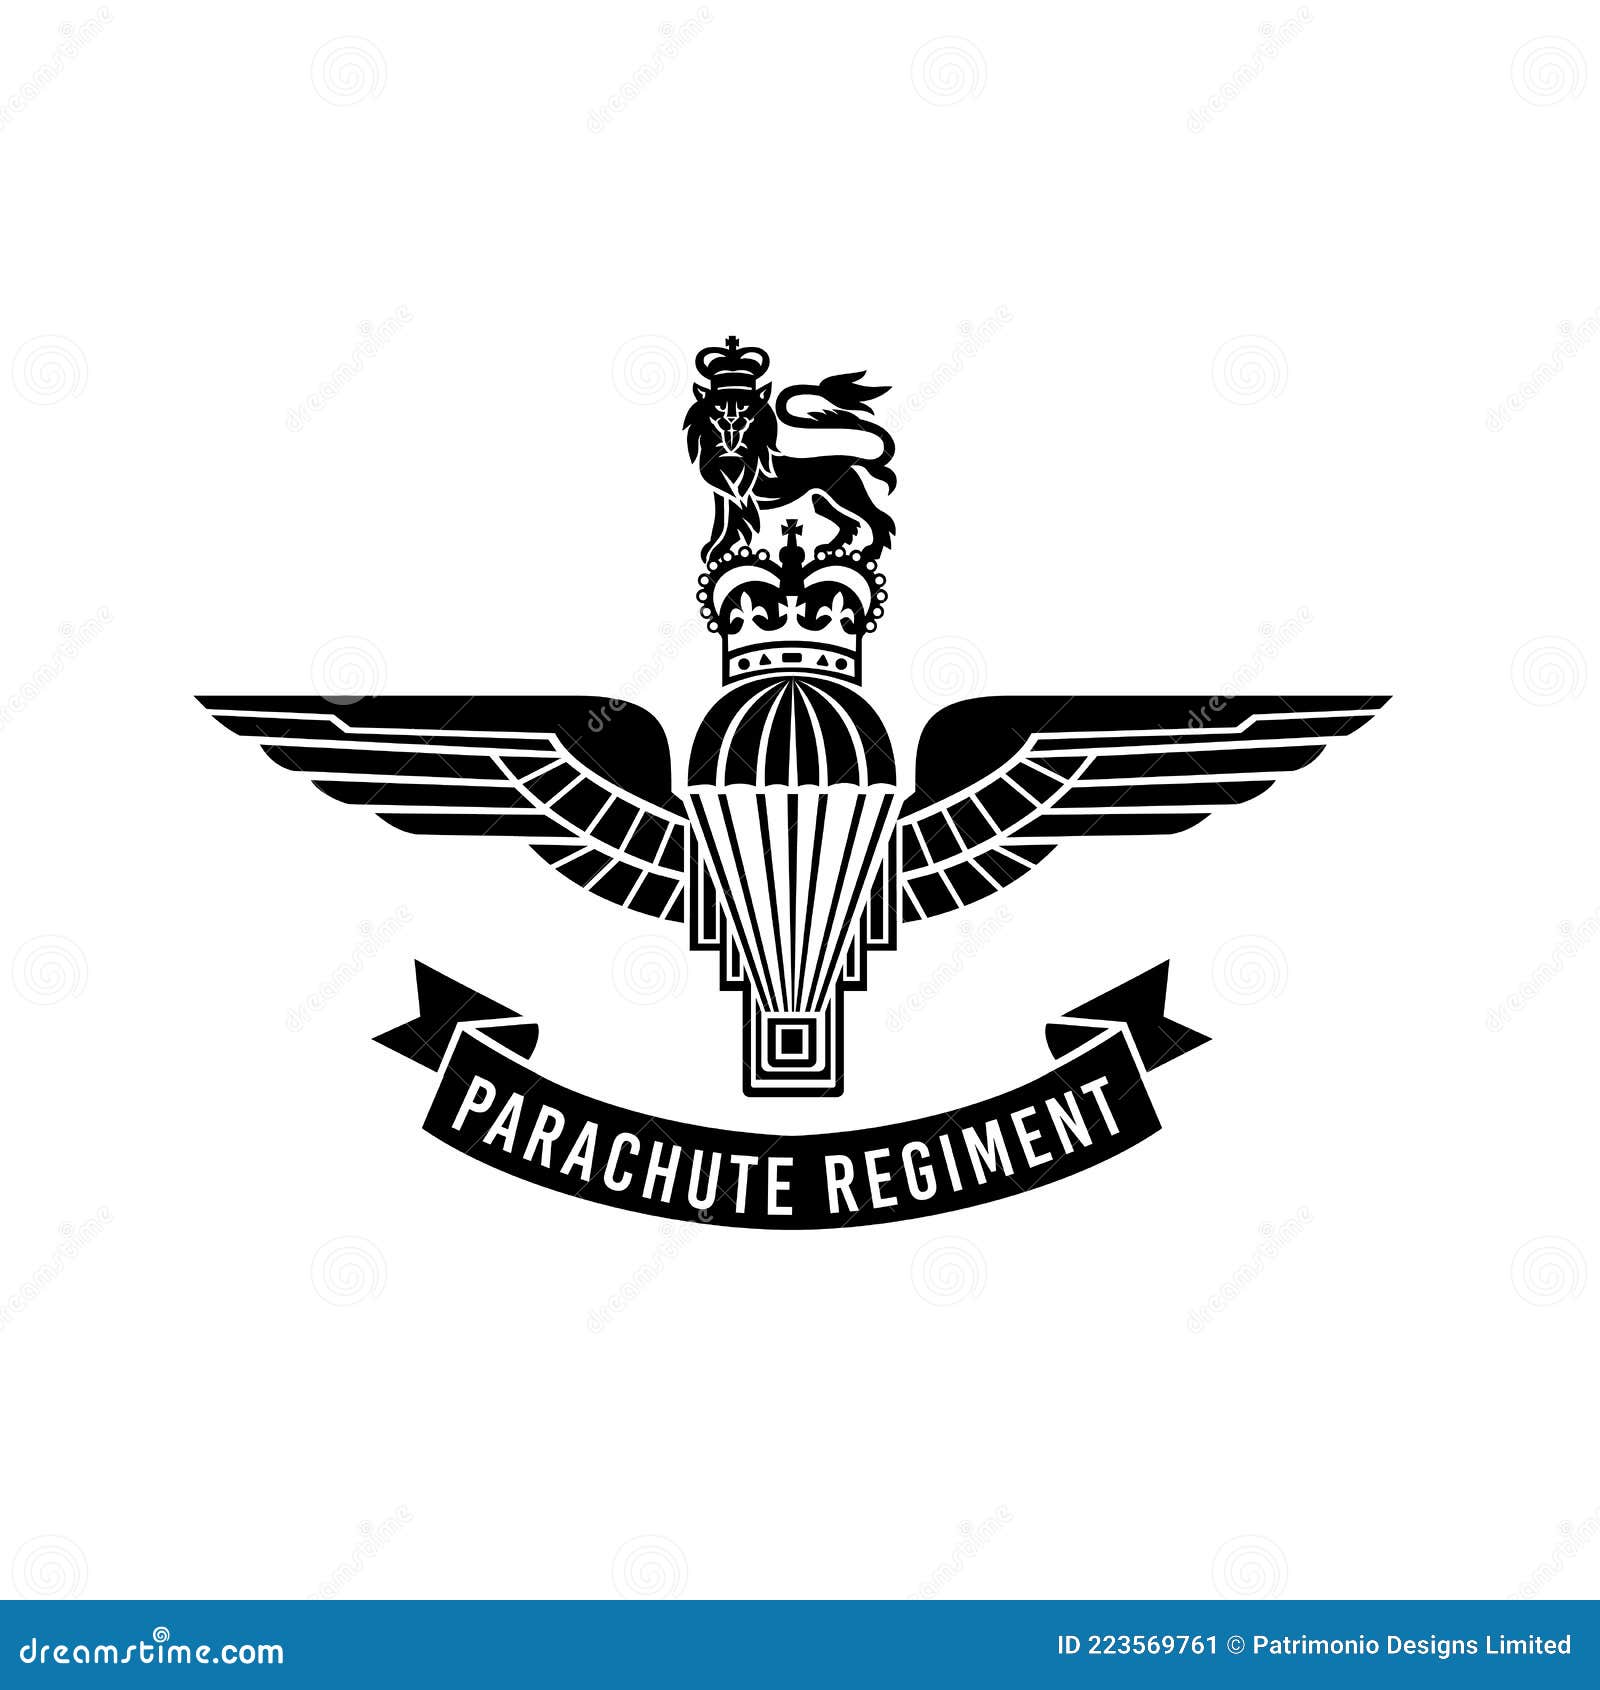 parachute regiment insignia with parachute with wings royal crown and lion worn by paratroopers in the british armed forces